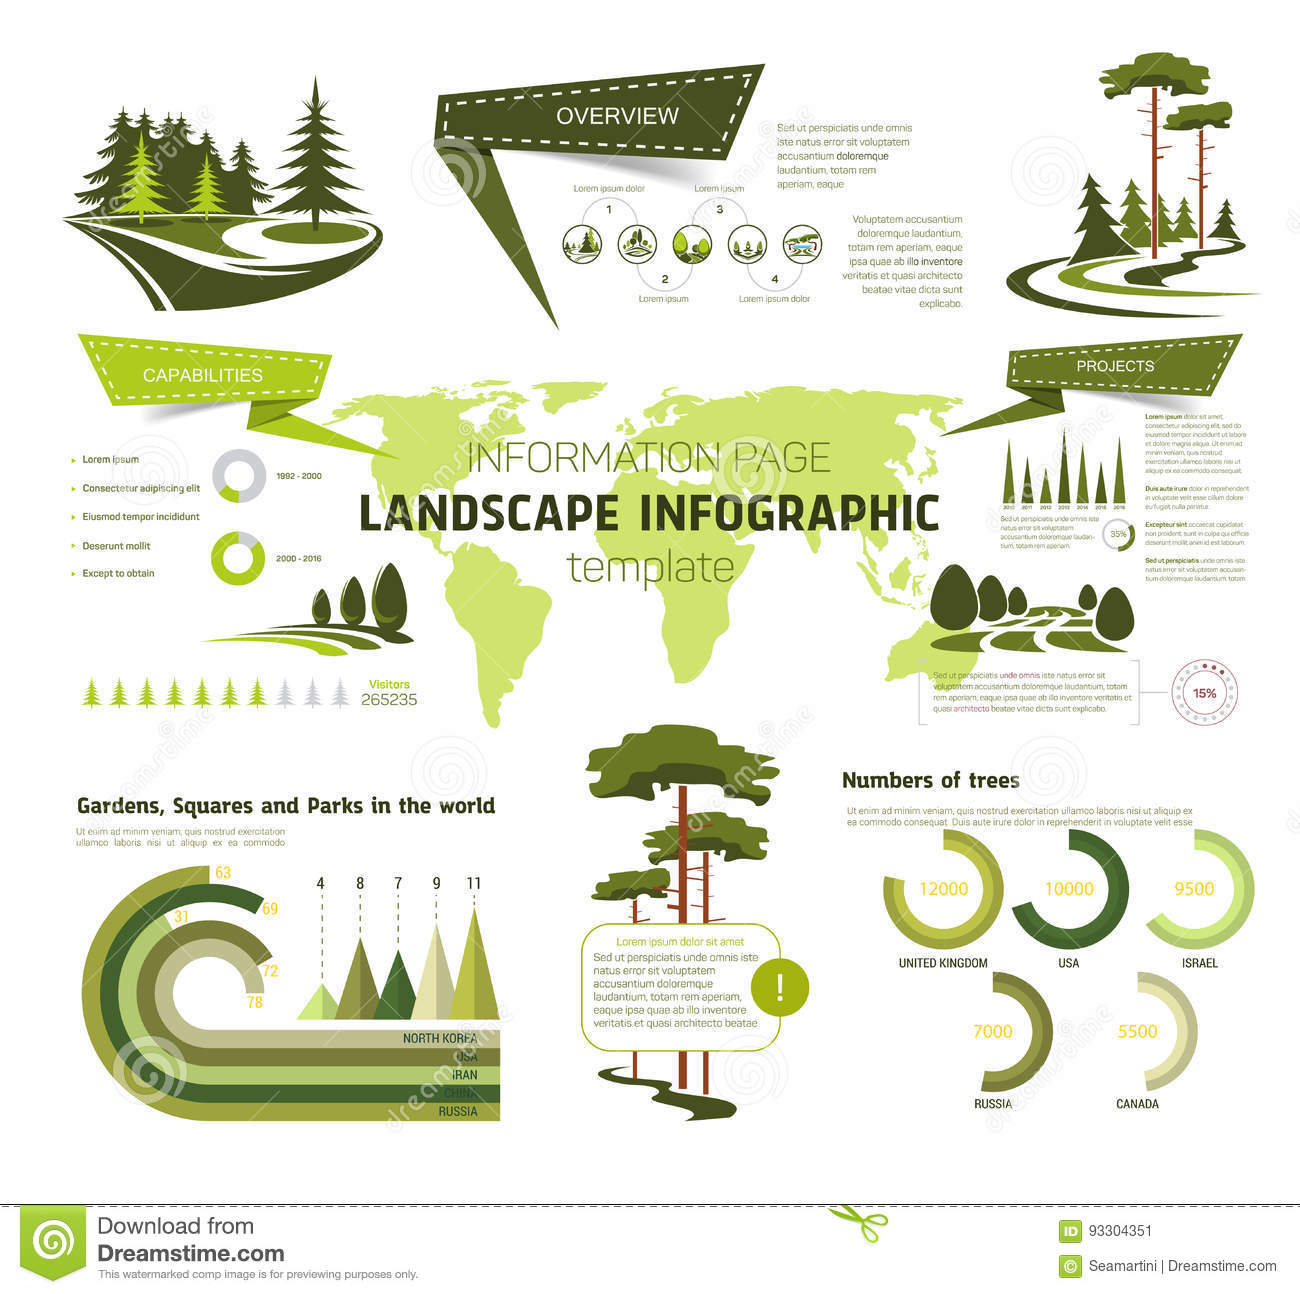 Sacred Places in Urban Environments (Infographic) - Nature Sacred